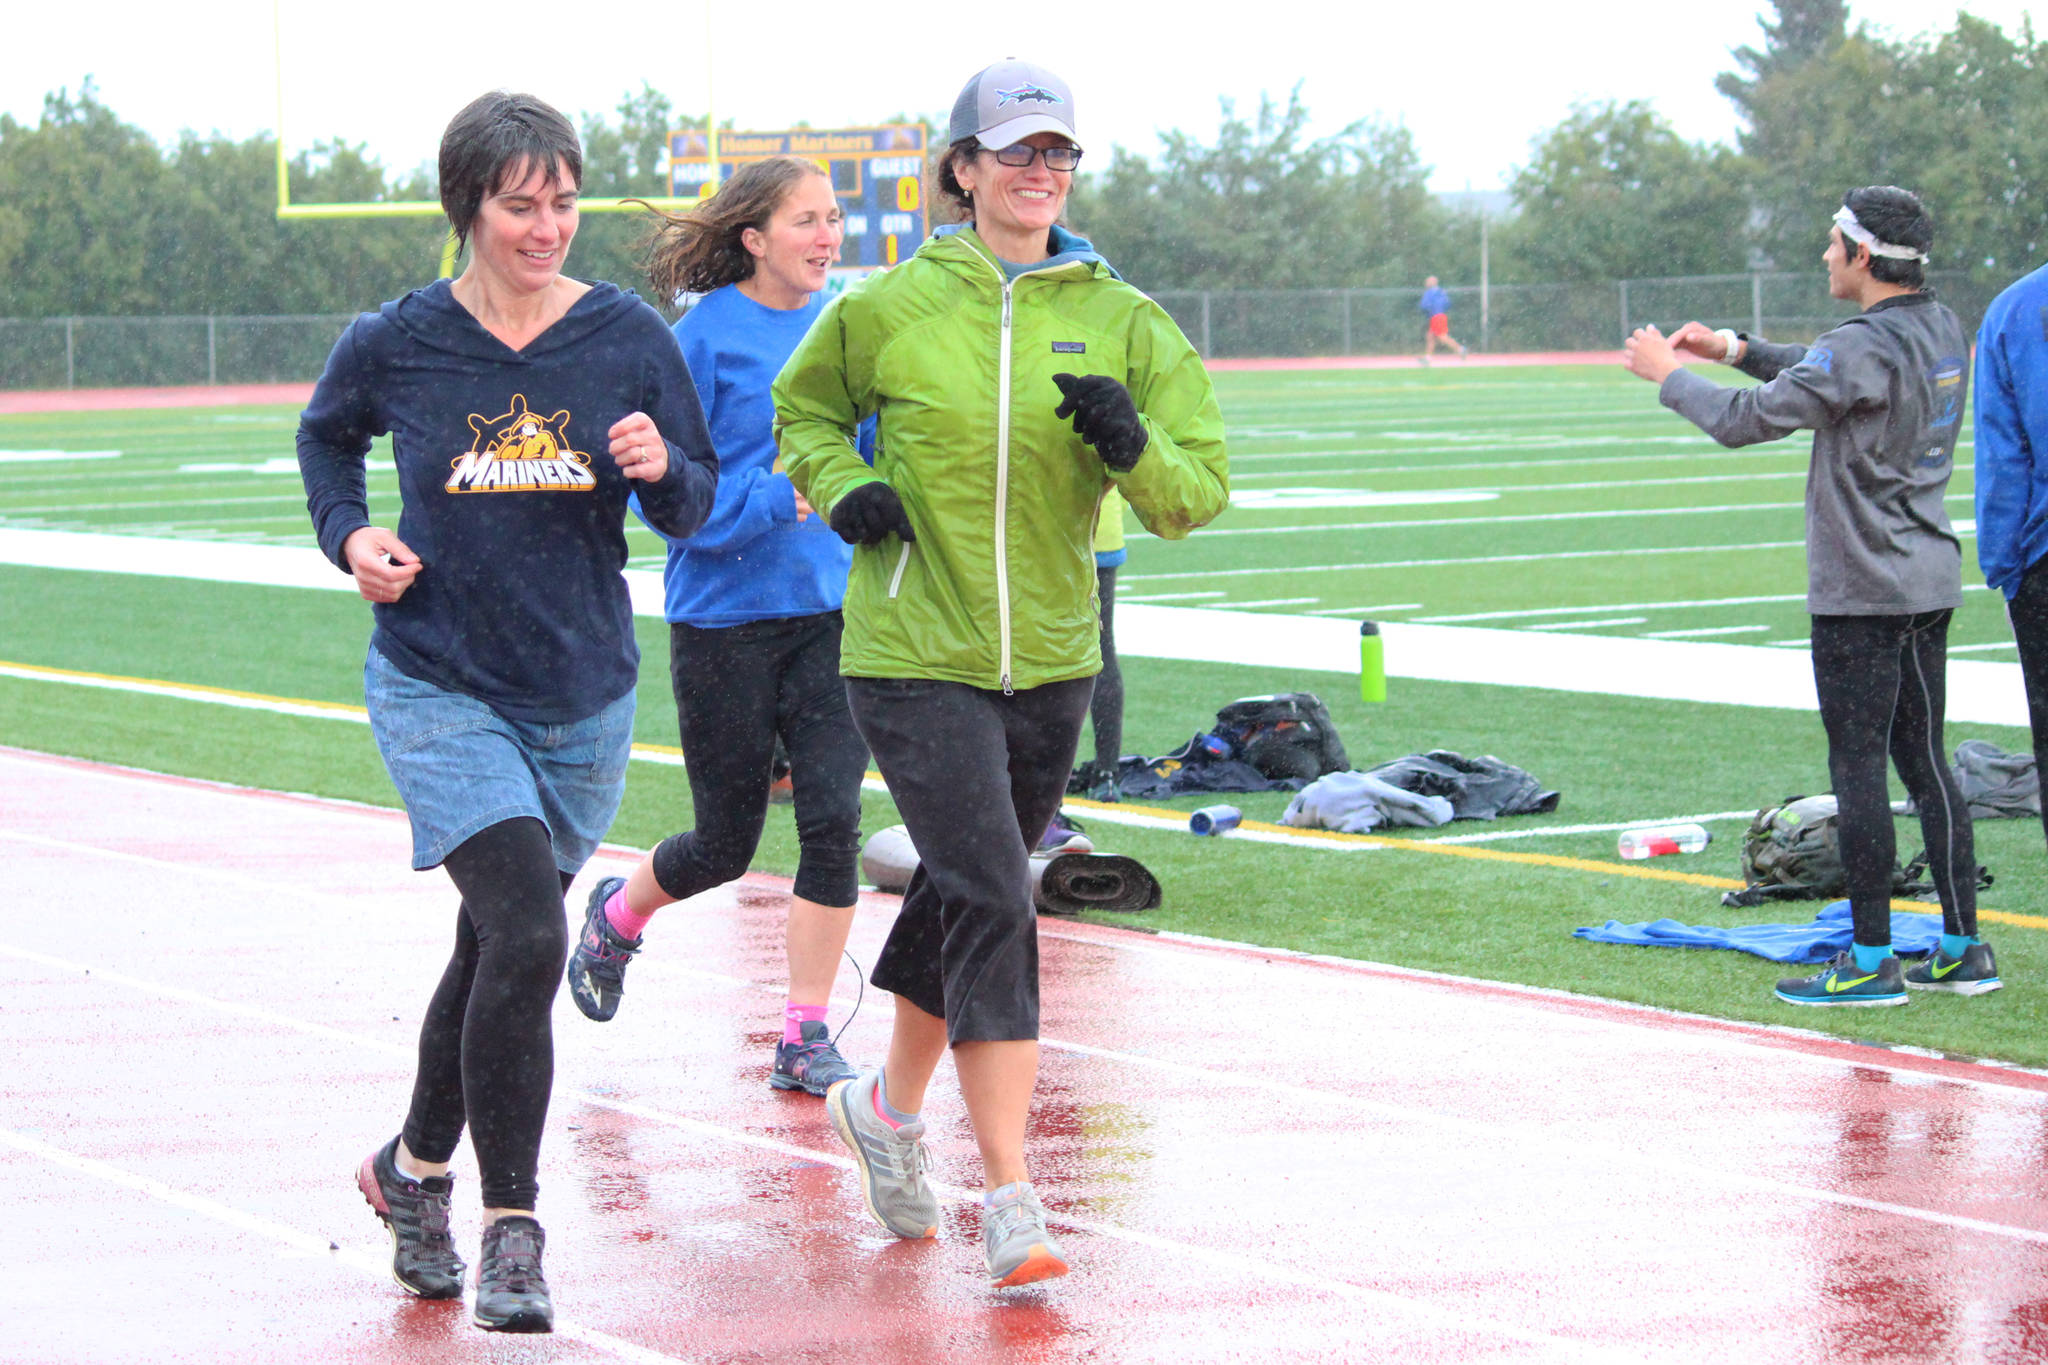 Kathy Beachy (left) runs around the Homer High School track with Saundra Hudson, an active member and cultivator of the running community and a teacher at the high school, during the Mariner Mile on Thursday, Sept. 14, 2017 in Homer, Alaska. Hudson got a concussion this past March when she slipped on the ice while running, and the mile she ran in the fundraising event for the Kachemak Bay Running Club was the her first return to running in six months. (Photo by Megan Pacer/Homer News)